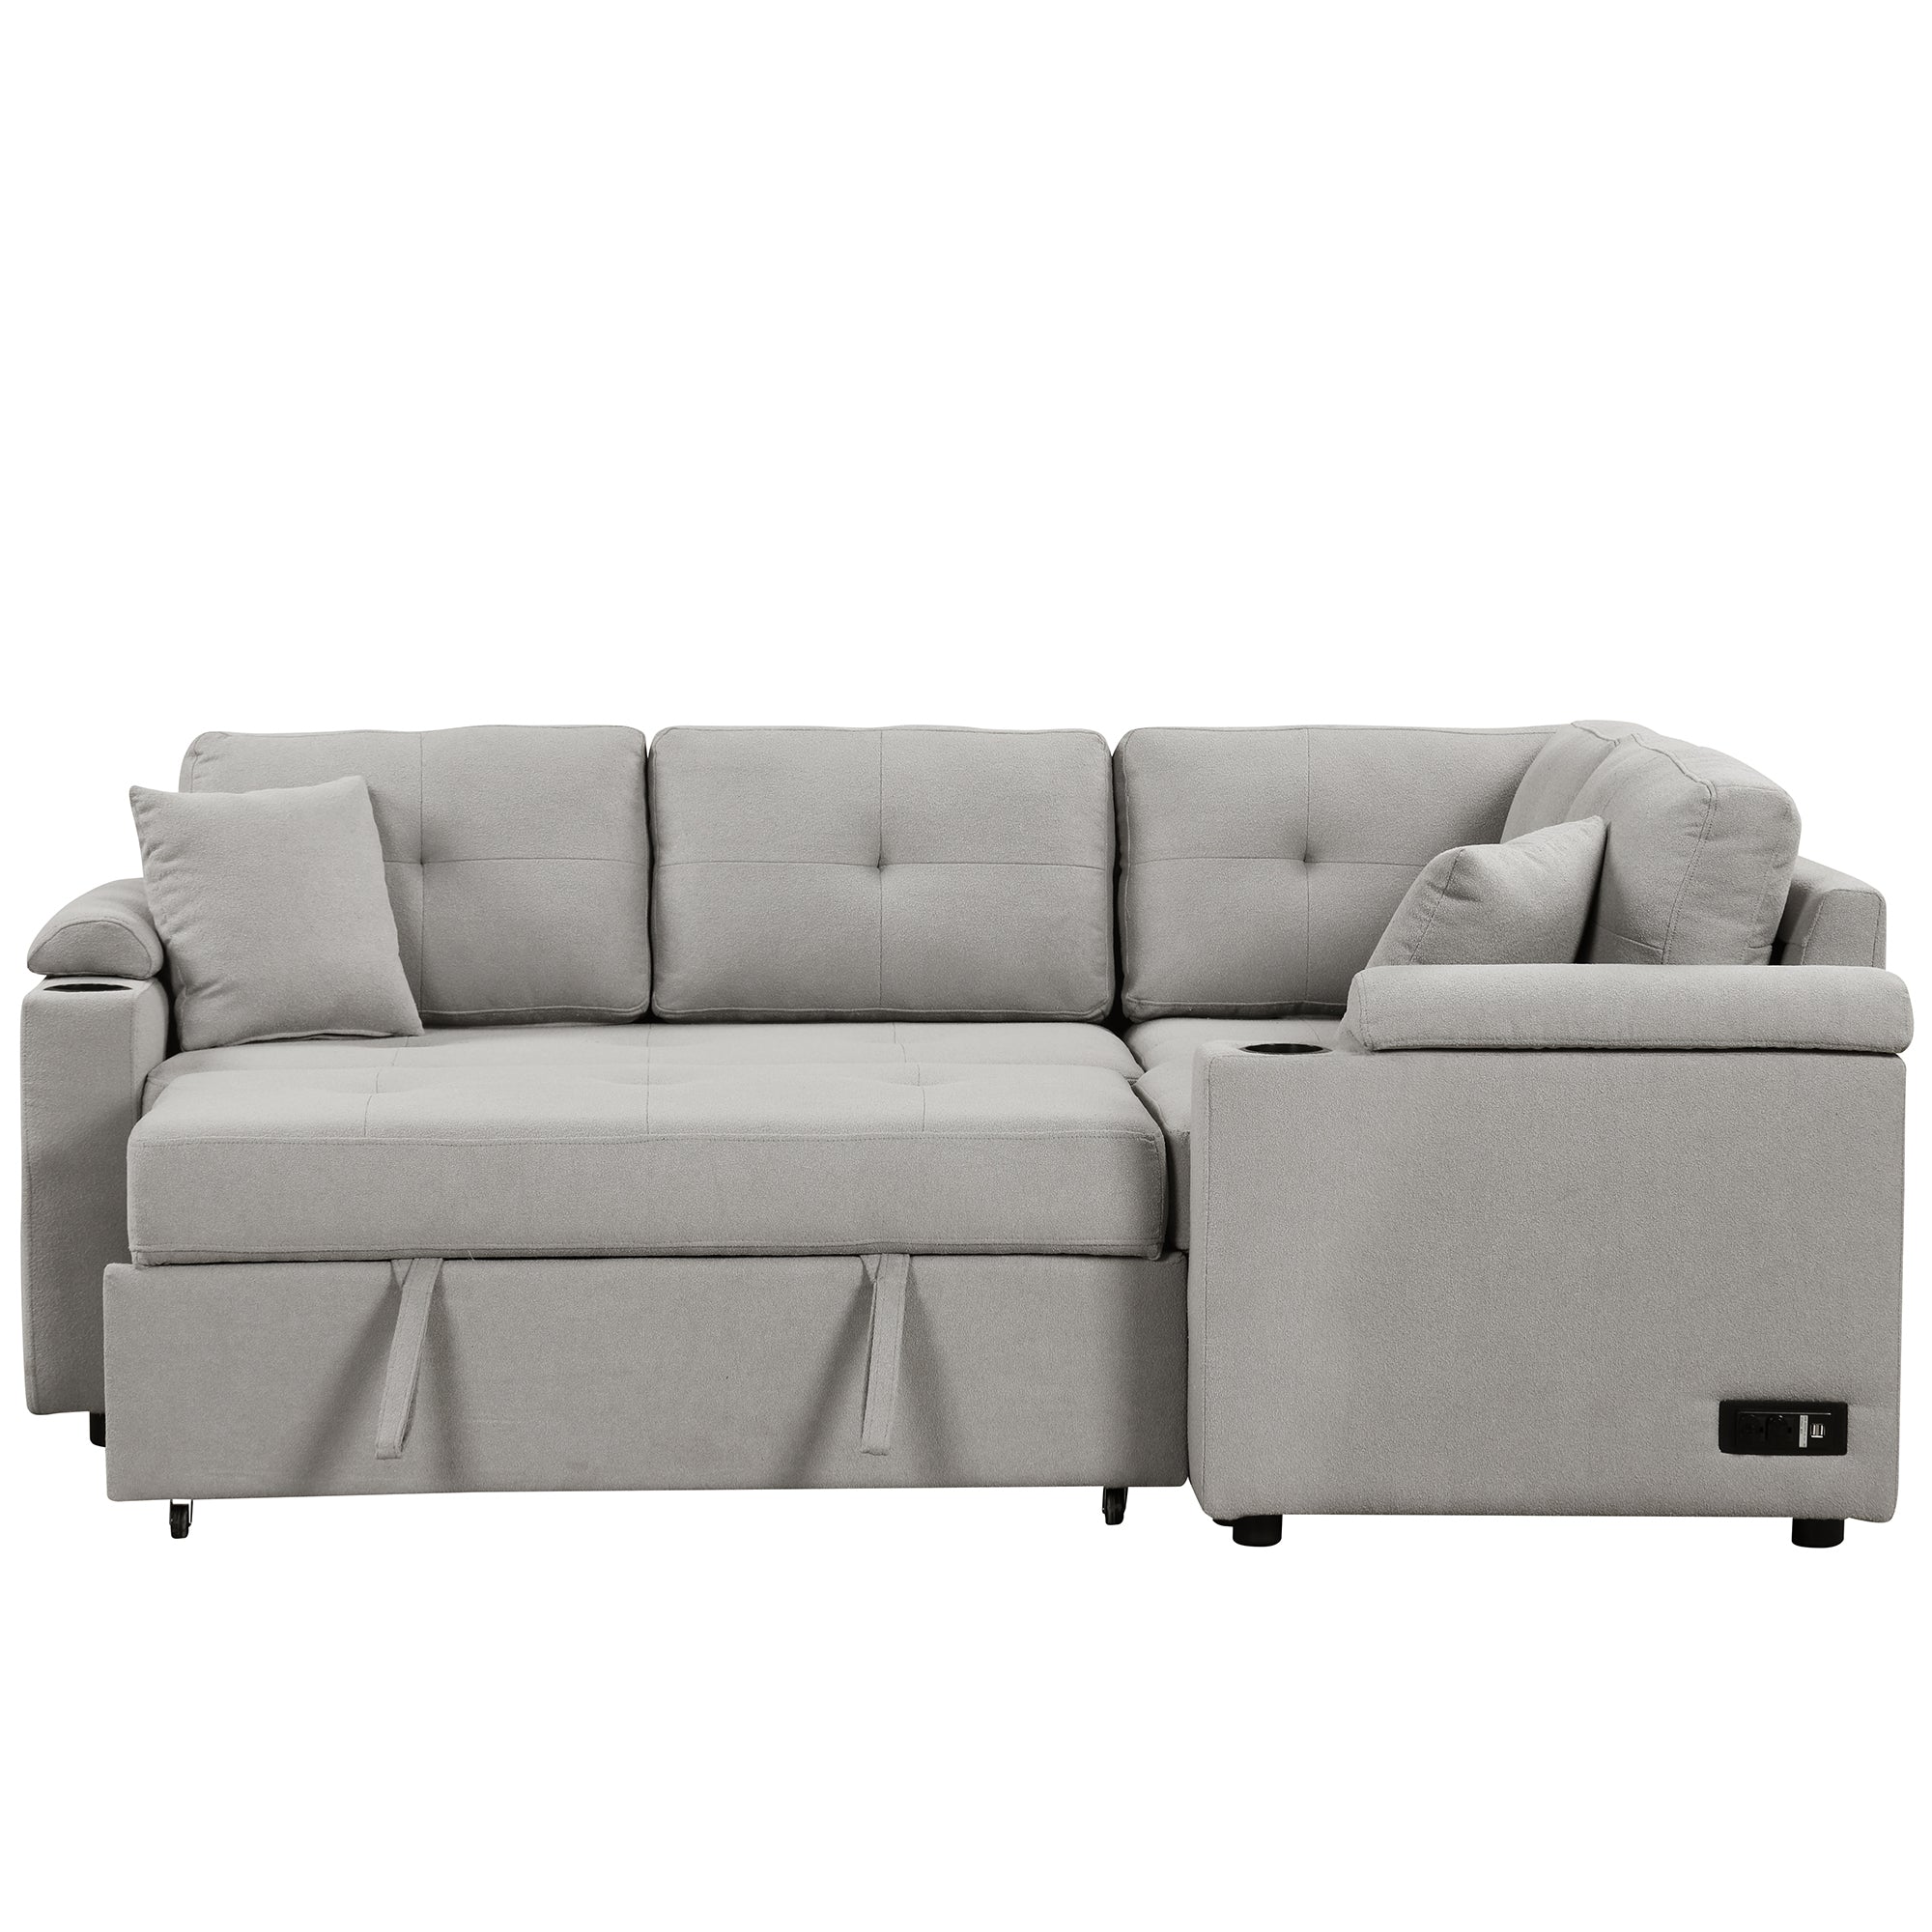 L-Shaped Boucle Sleeper Sectional Sofa - Grey with USB Ports-Sleeper Sectionals-American Furniture Outlet